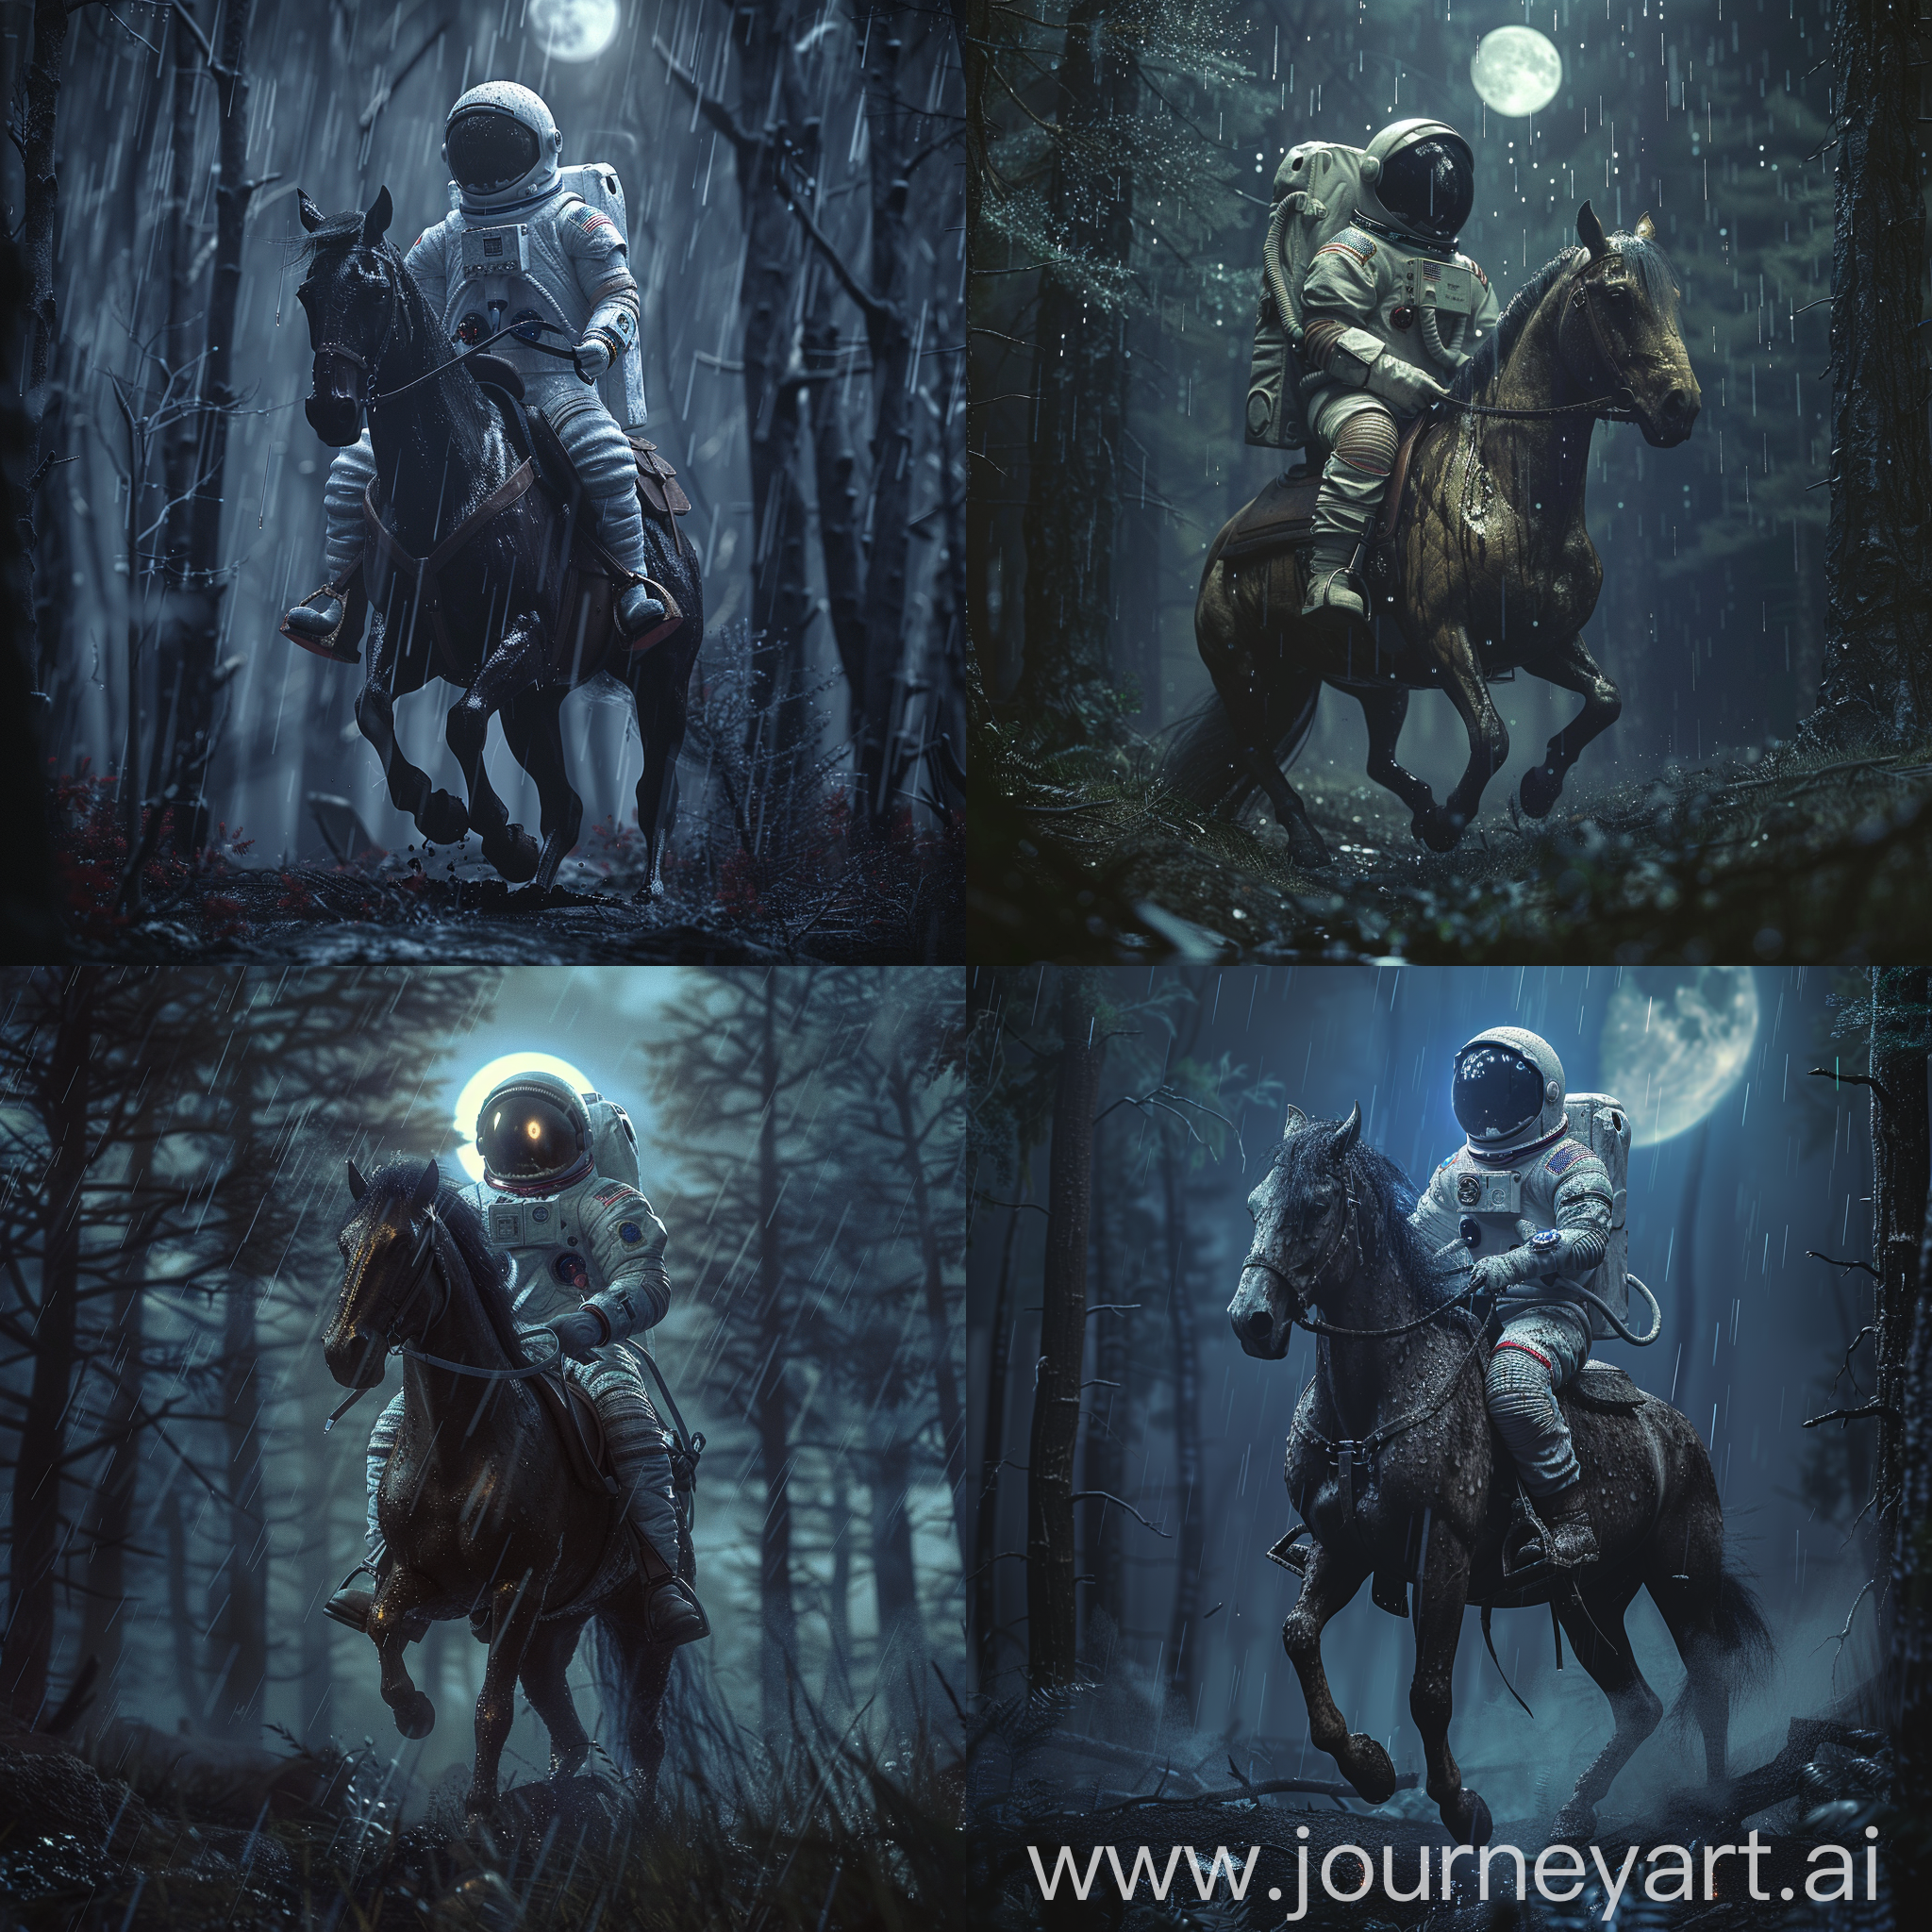 An image of an astronaut riding an upset horse in a dark forest in rainy weather photography, ray tracing, global brightness, smooth, ultra high definition, 8k, unreal engine 5, super sharp focus, moon dreamy lighting epic background